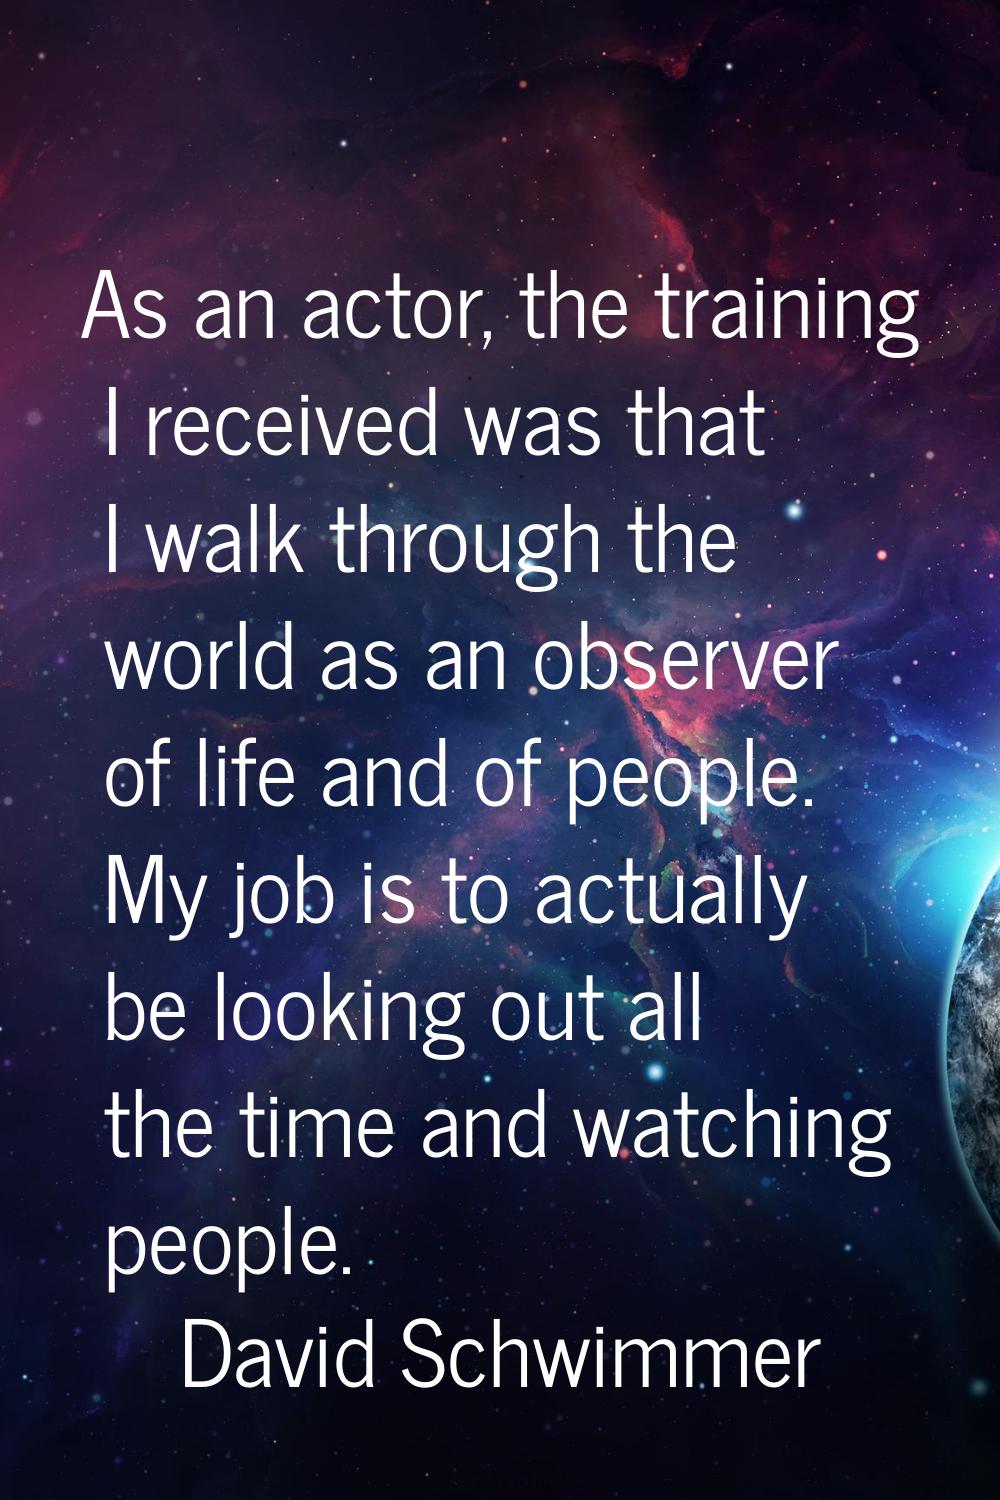 As an actor, the training I received was that I walk through the world as an observer of life and o